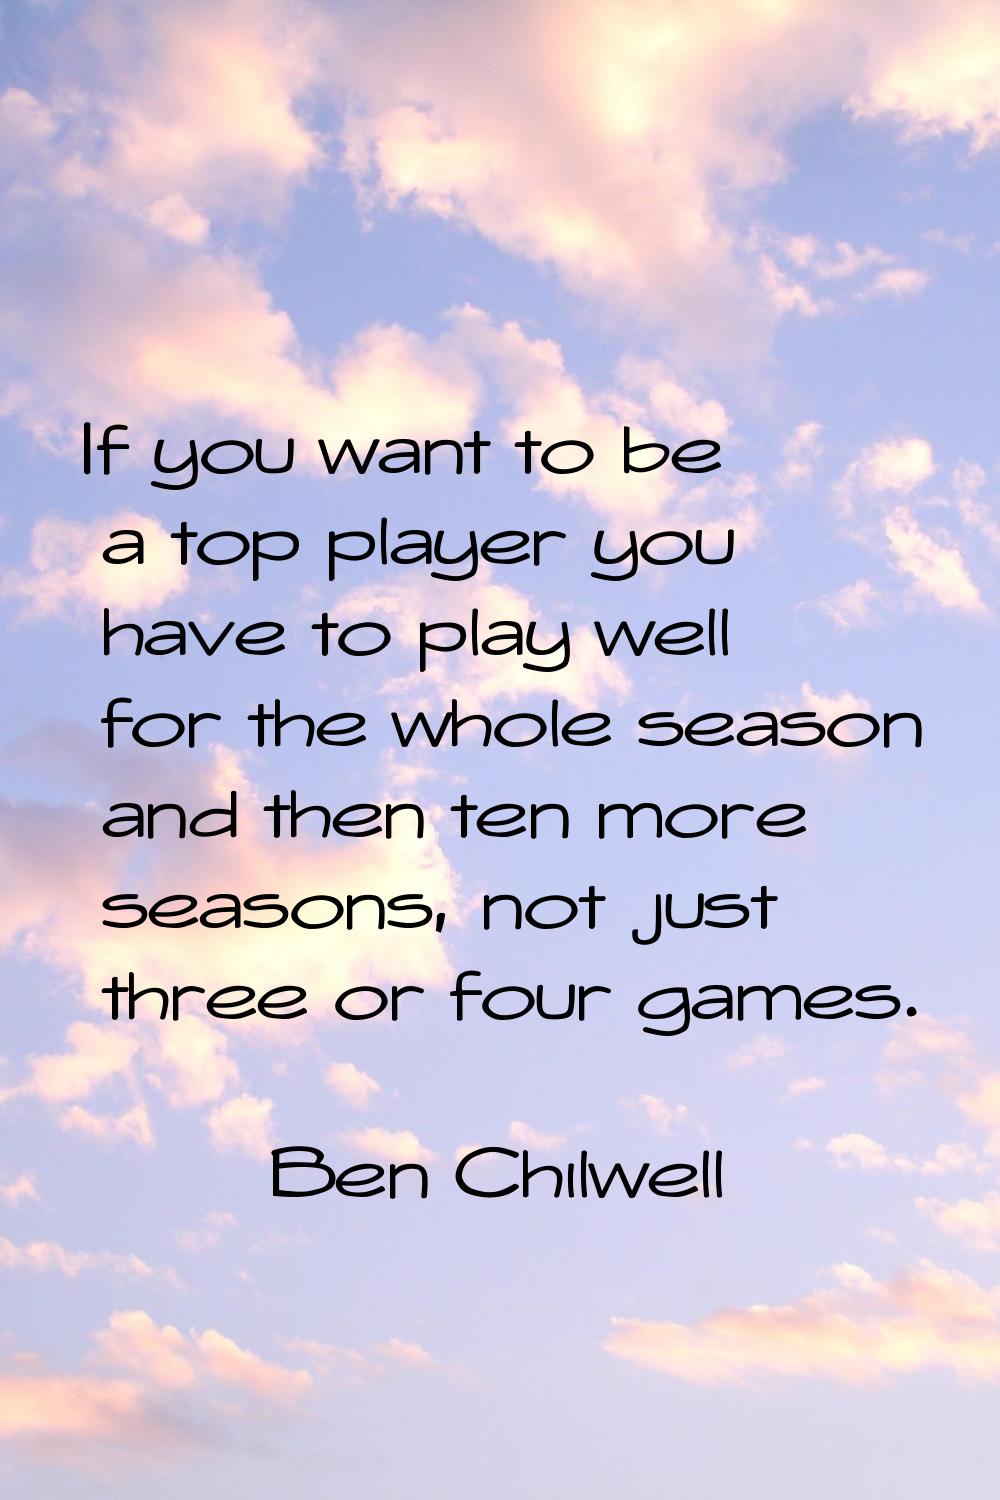 If you want to be a top player you have to play well for the whole season and then ten more seasons